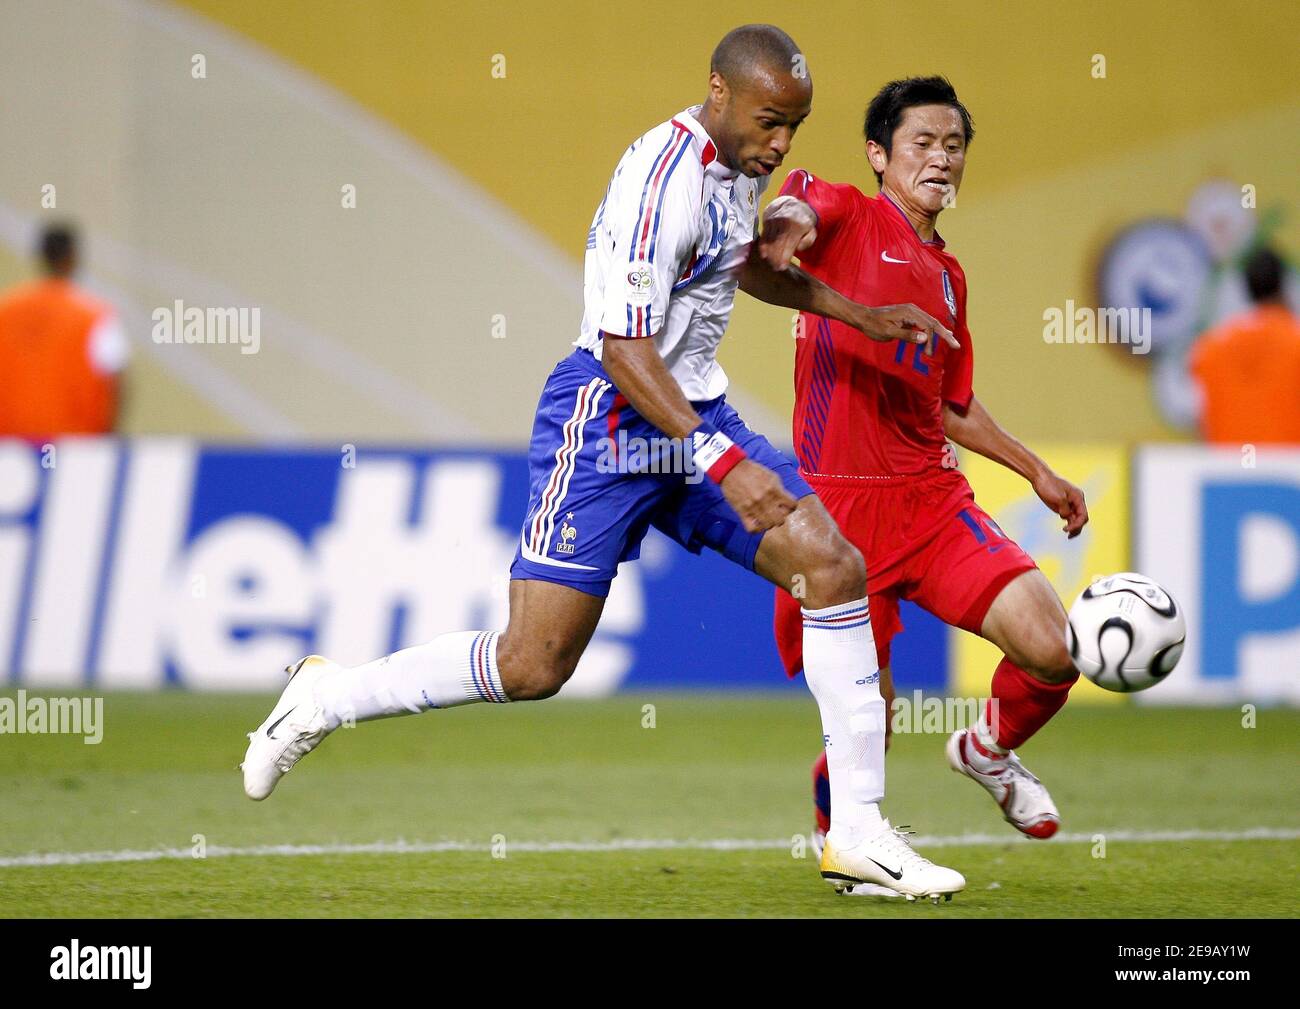 France's Thierry Henry in action during the World Cup 2006, Group G France vs South Korea, in Leipzig, Germany, on June 18, 2006. The game ended in draw 1-1. Photo by Christian Liewig/ABACAPRESS.COM Stock Photo